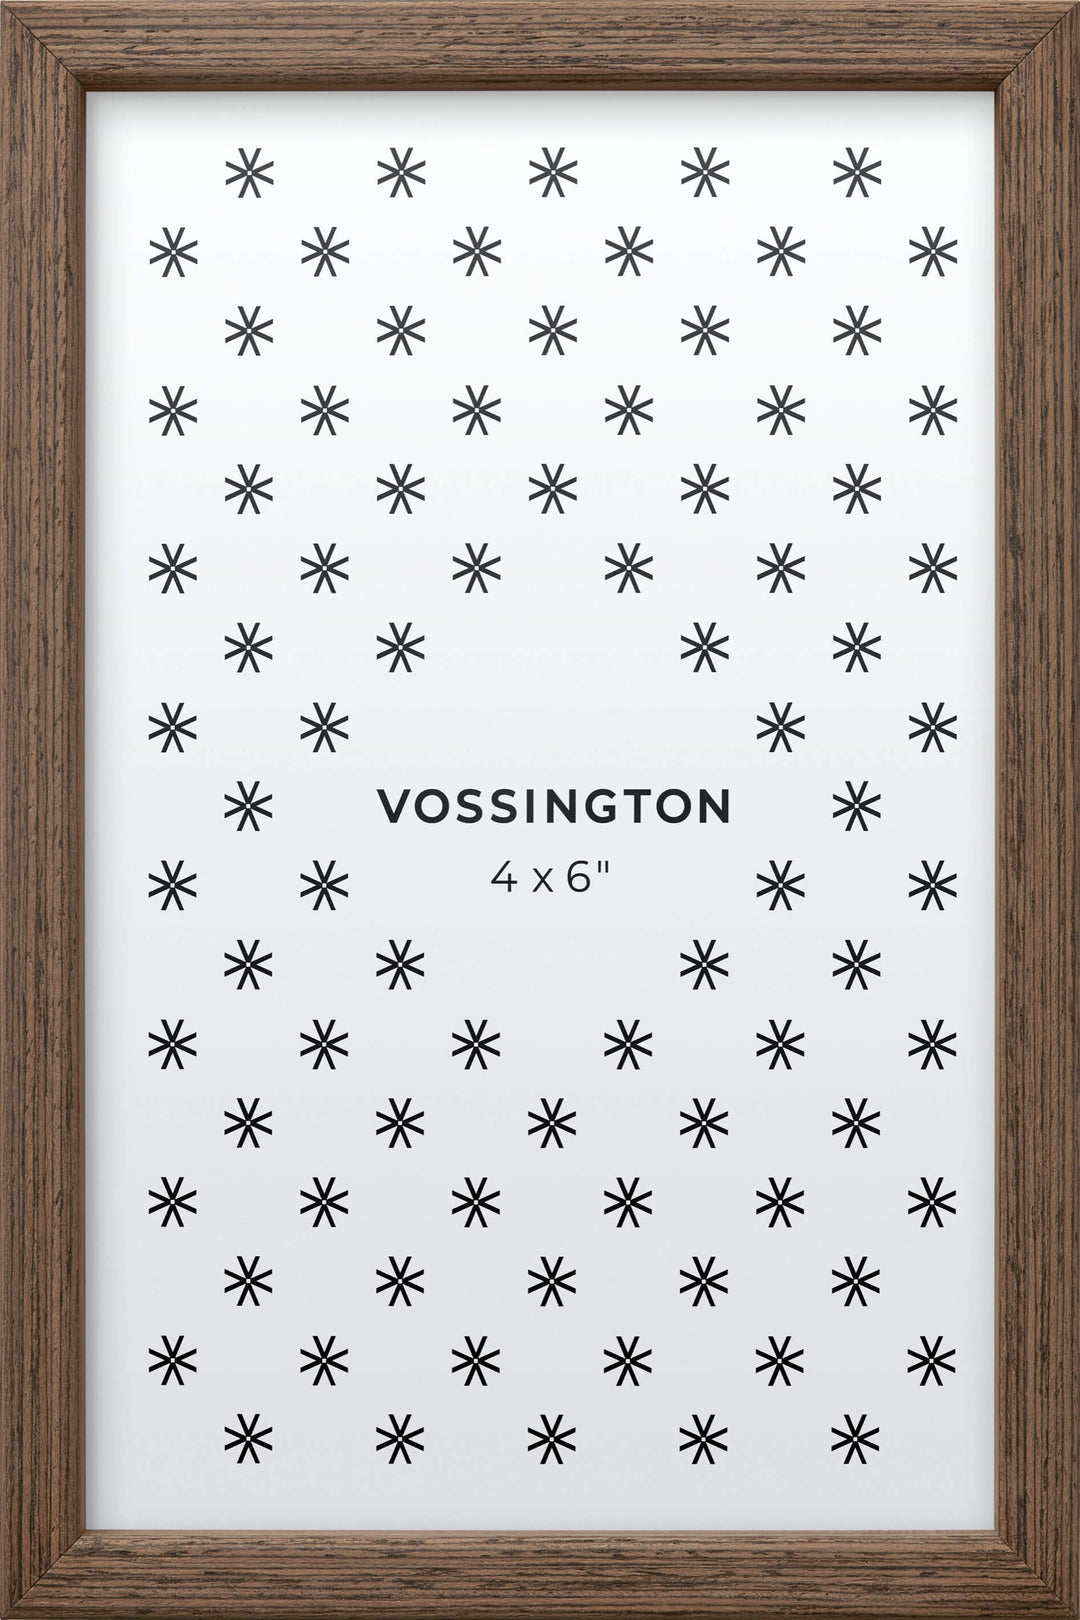 4x6 Frame - Exclusive Exotic Wood Photo Frame From Vossington